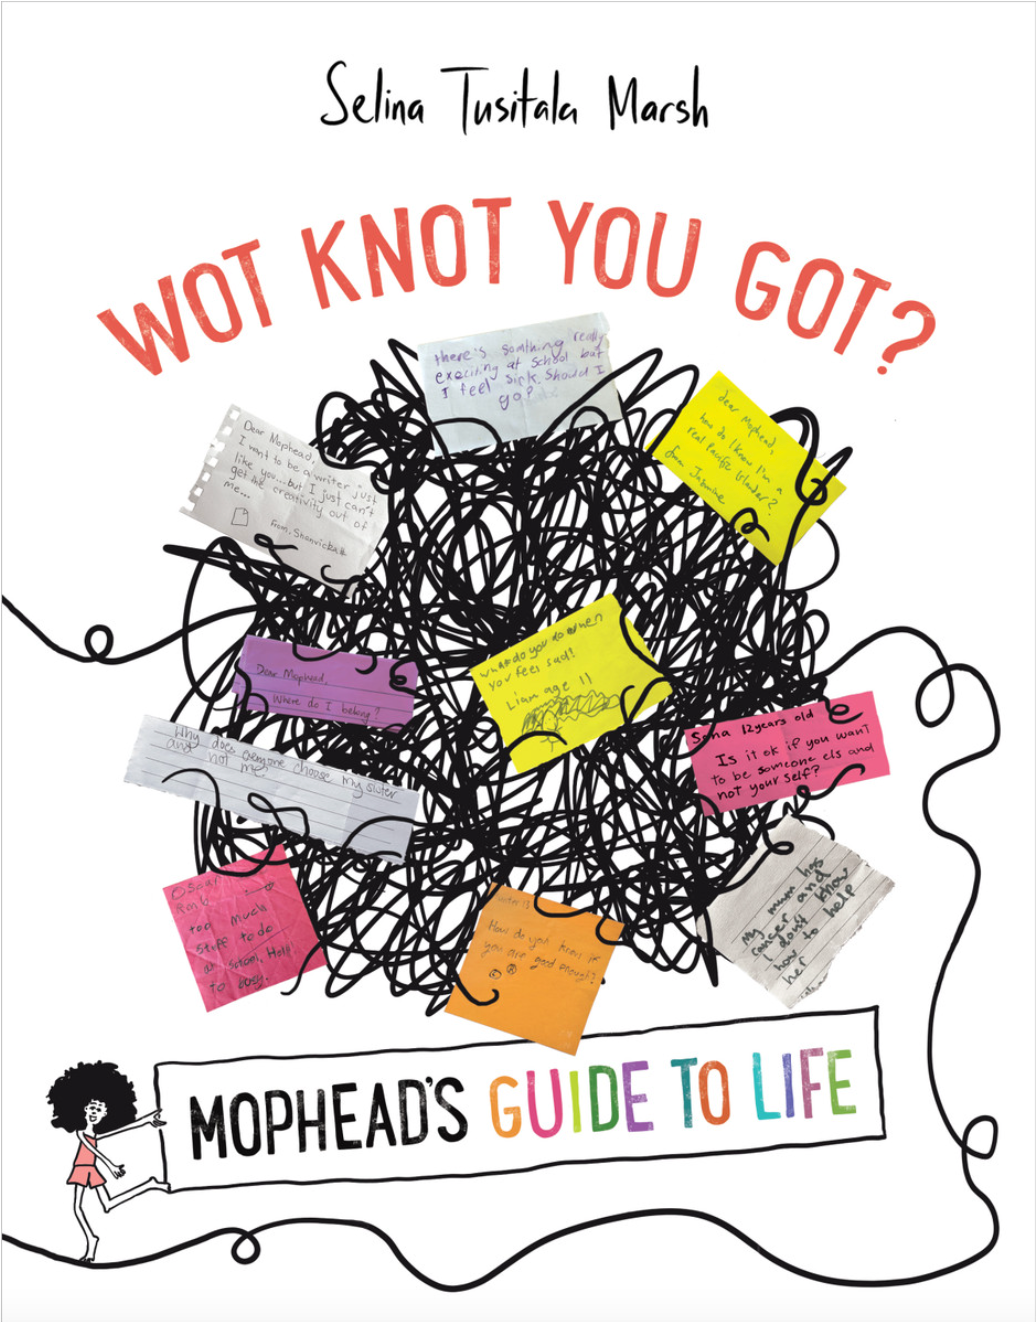 WOT KNOT YOU GOT? Mopheadʻs Guide To Life by Selina Tusitala Marsh